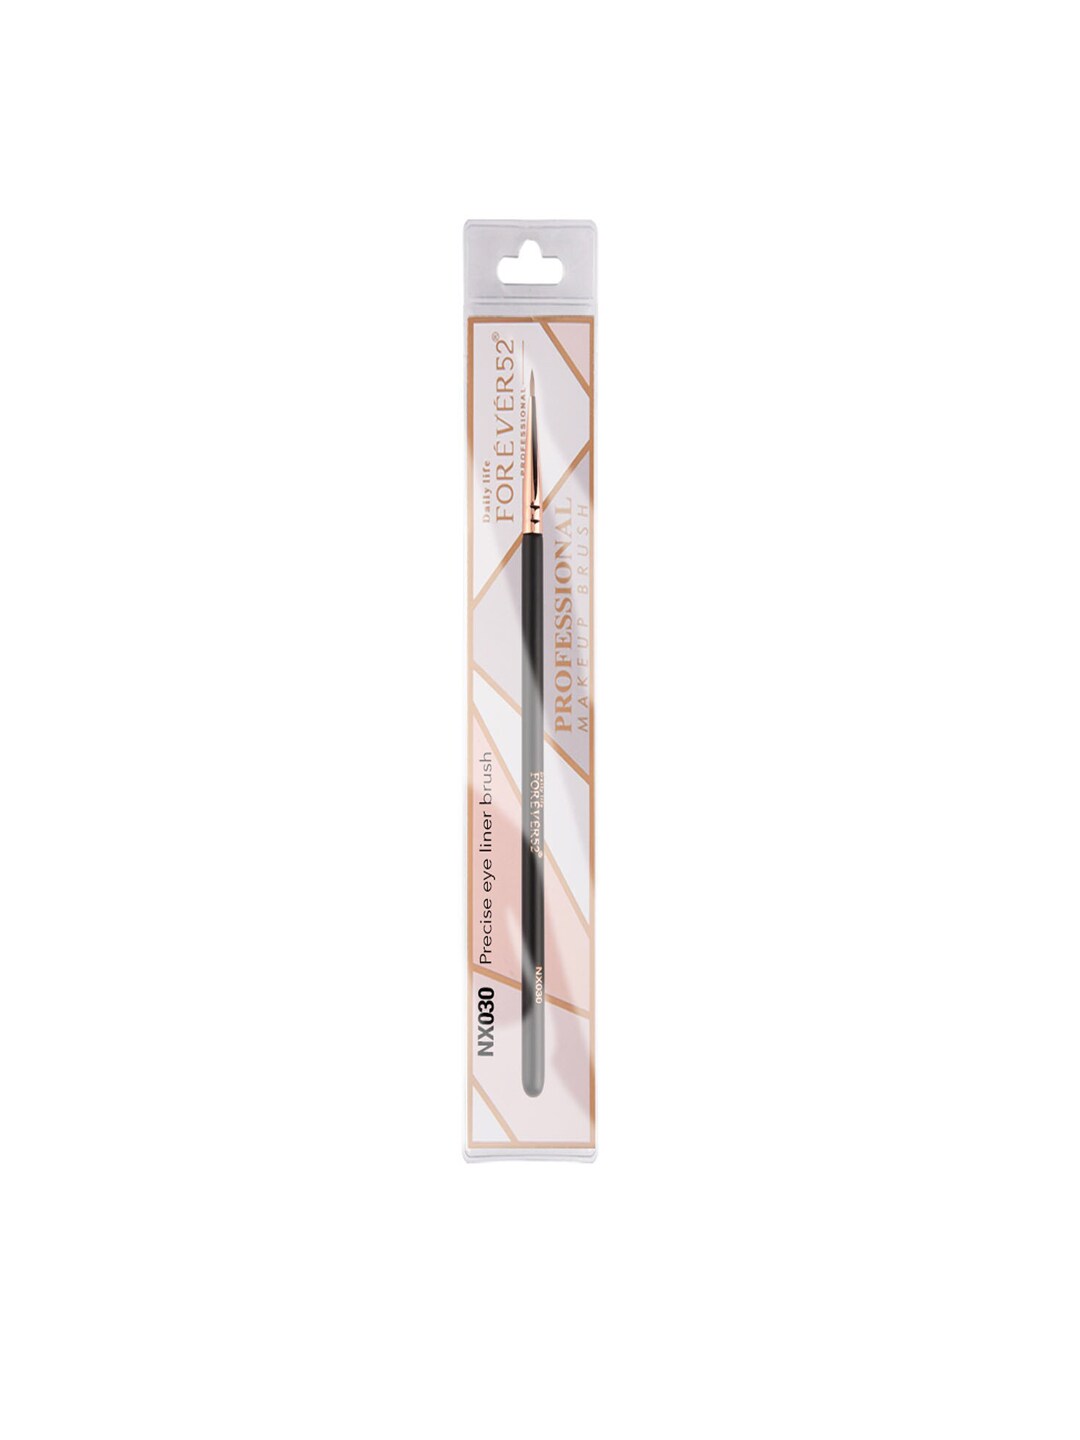 Daily Life Forever52 Precise eye liner brush NX030 Price in India